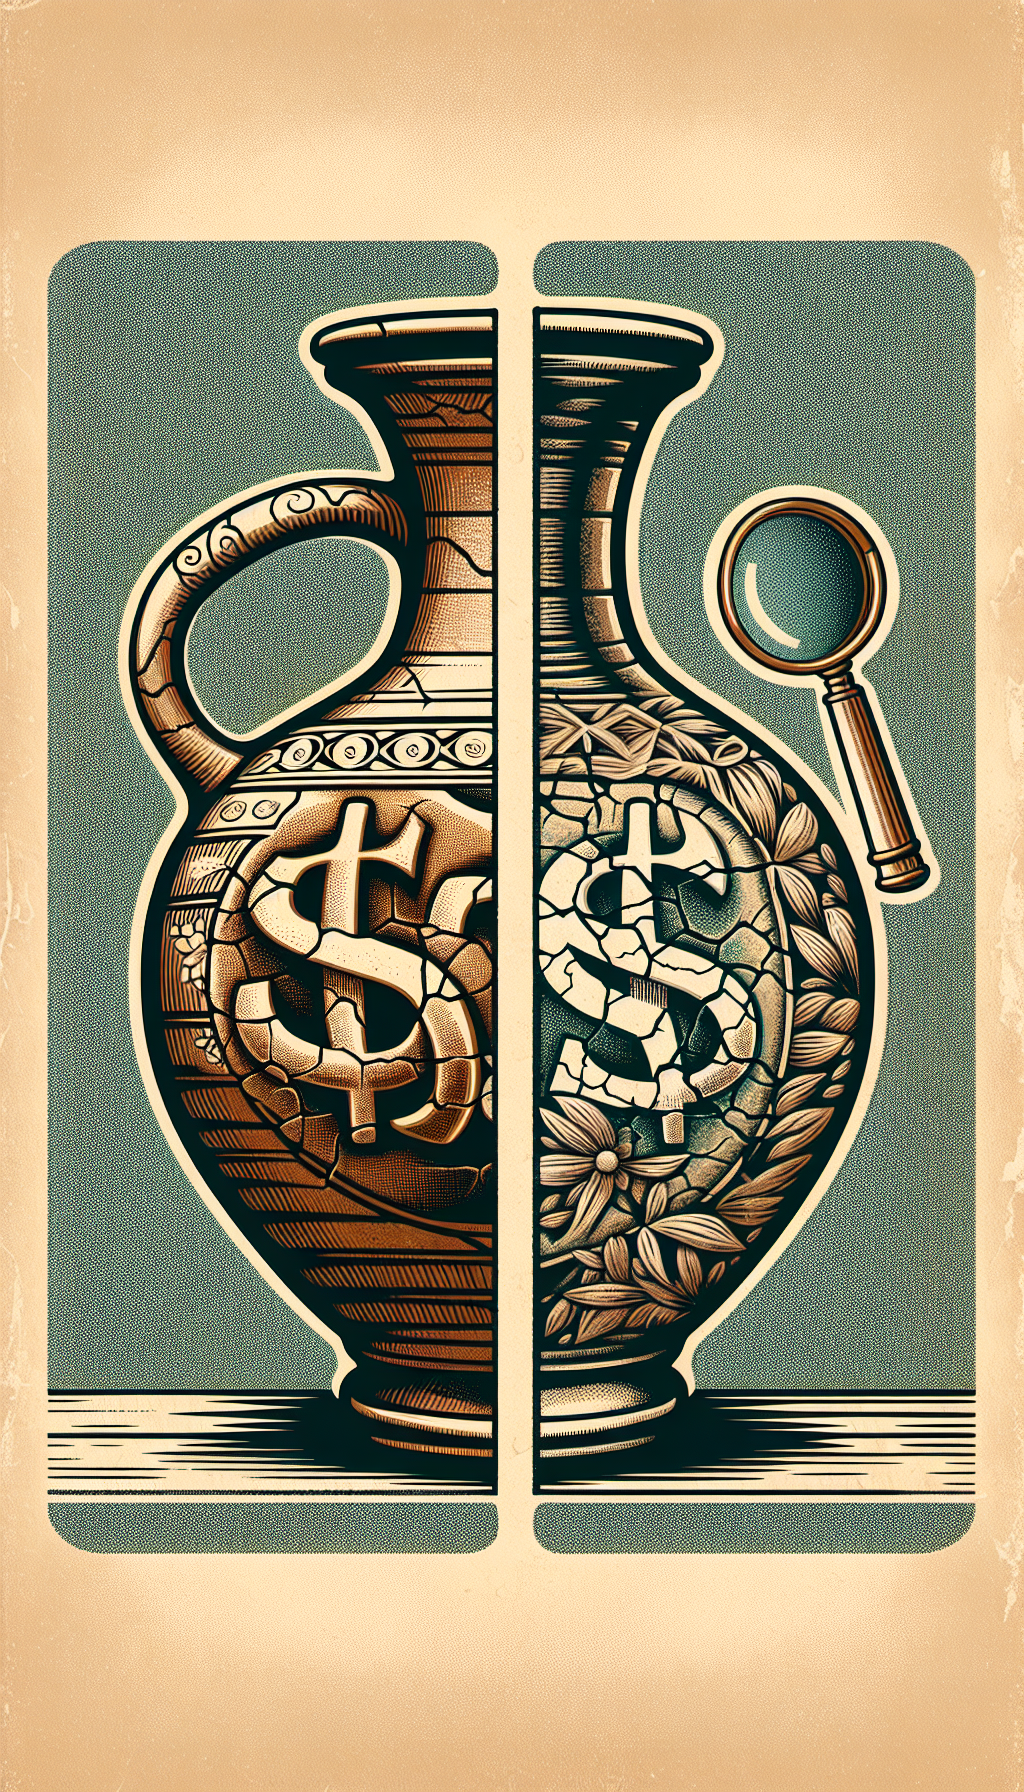 A split-view illustration of an antique stoneware jug: one side pristine, with "$$$" symbols, illustrating high value; the opposite side features exaggerated cracks, chips, and a faded pattern, with diminishing "$" symbols. This juxtaposition visually captures the influence of condition on the jug's value. Vintage-style textures emphasize antiquity, while a magnifying glass highlights the assessment aspect.